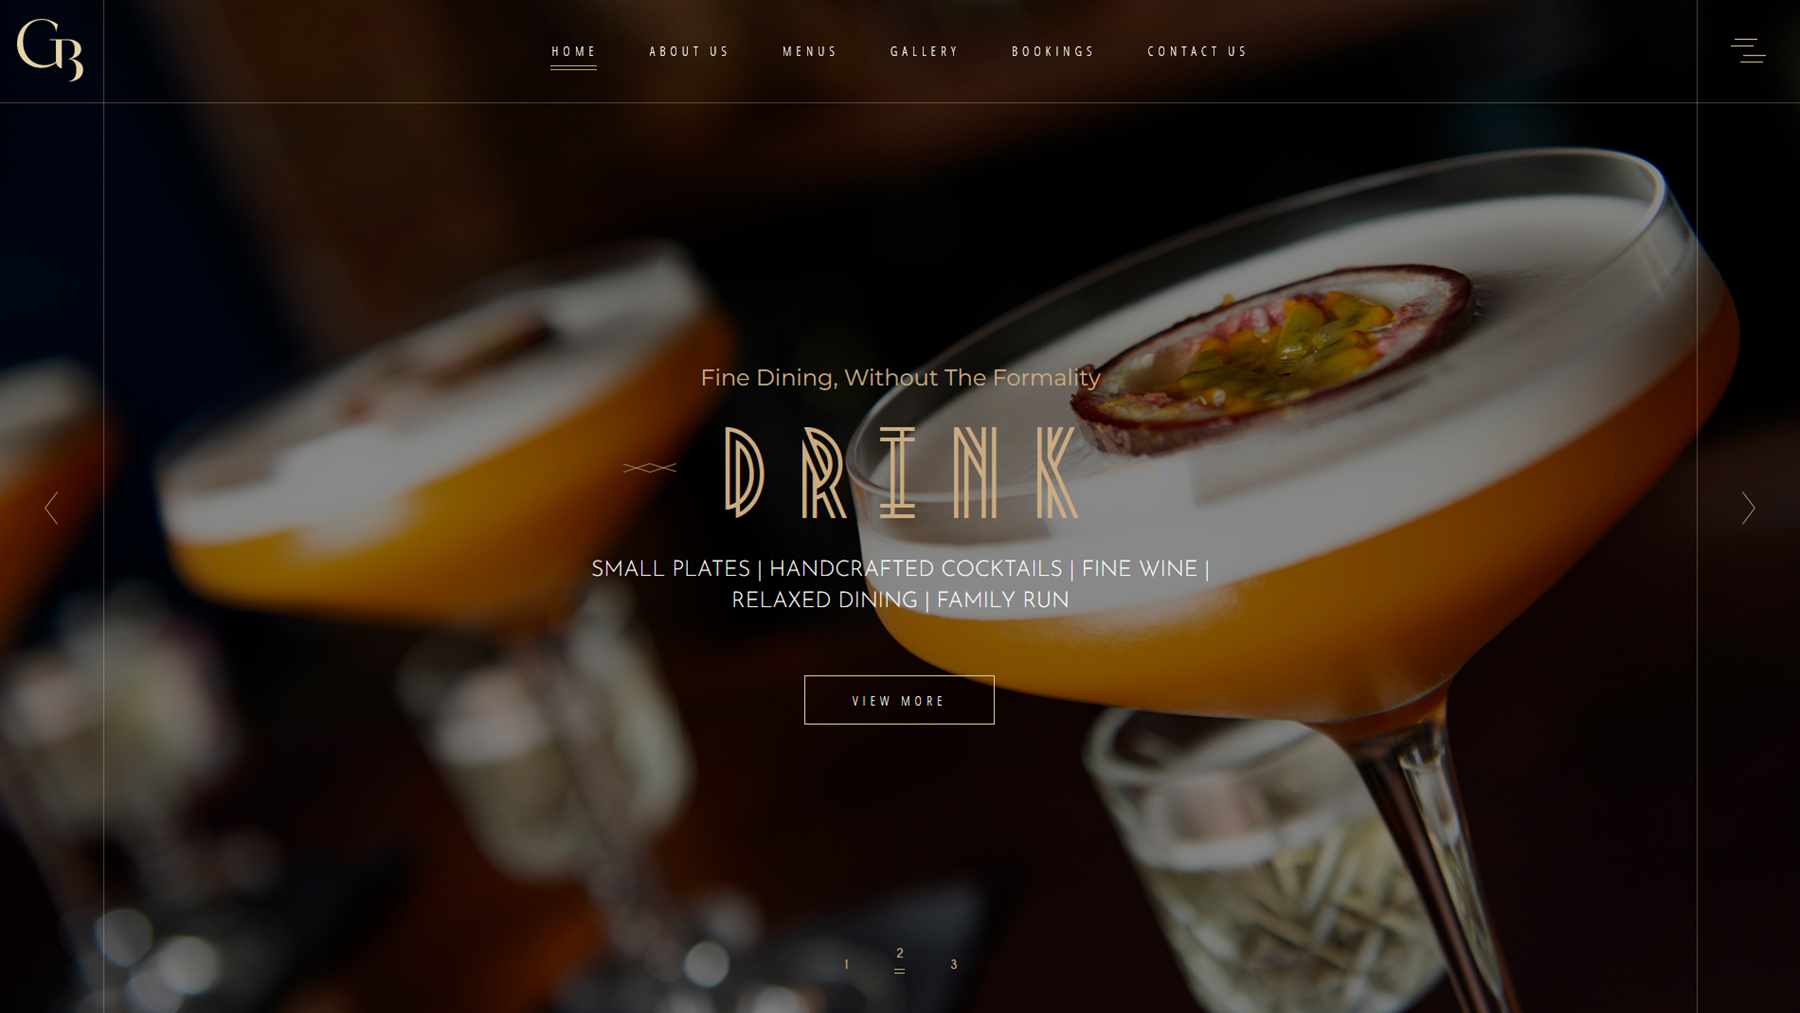 Homepage hero design for Chez Burton restaurant featuring a row of passion fruit cocktails.